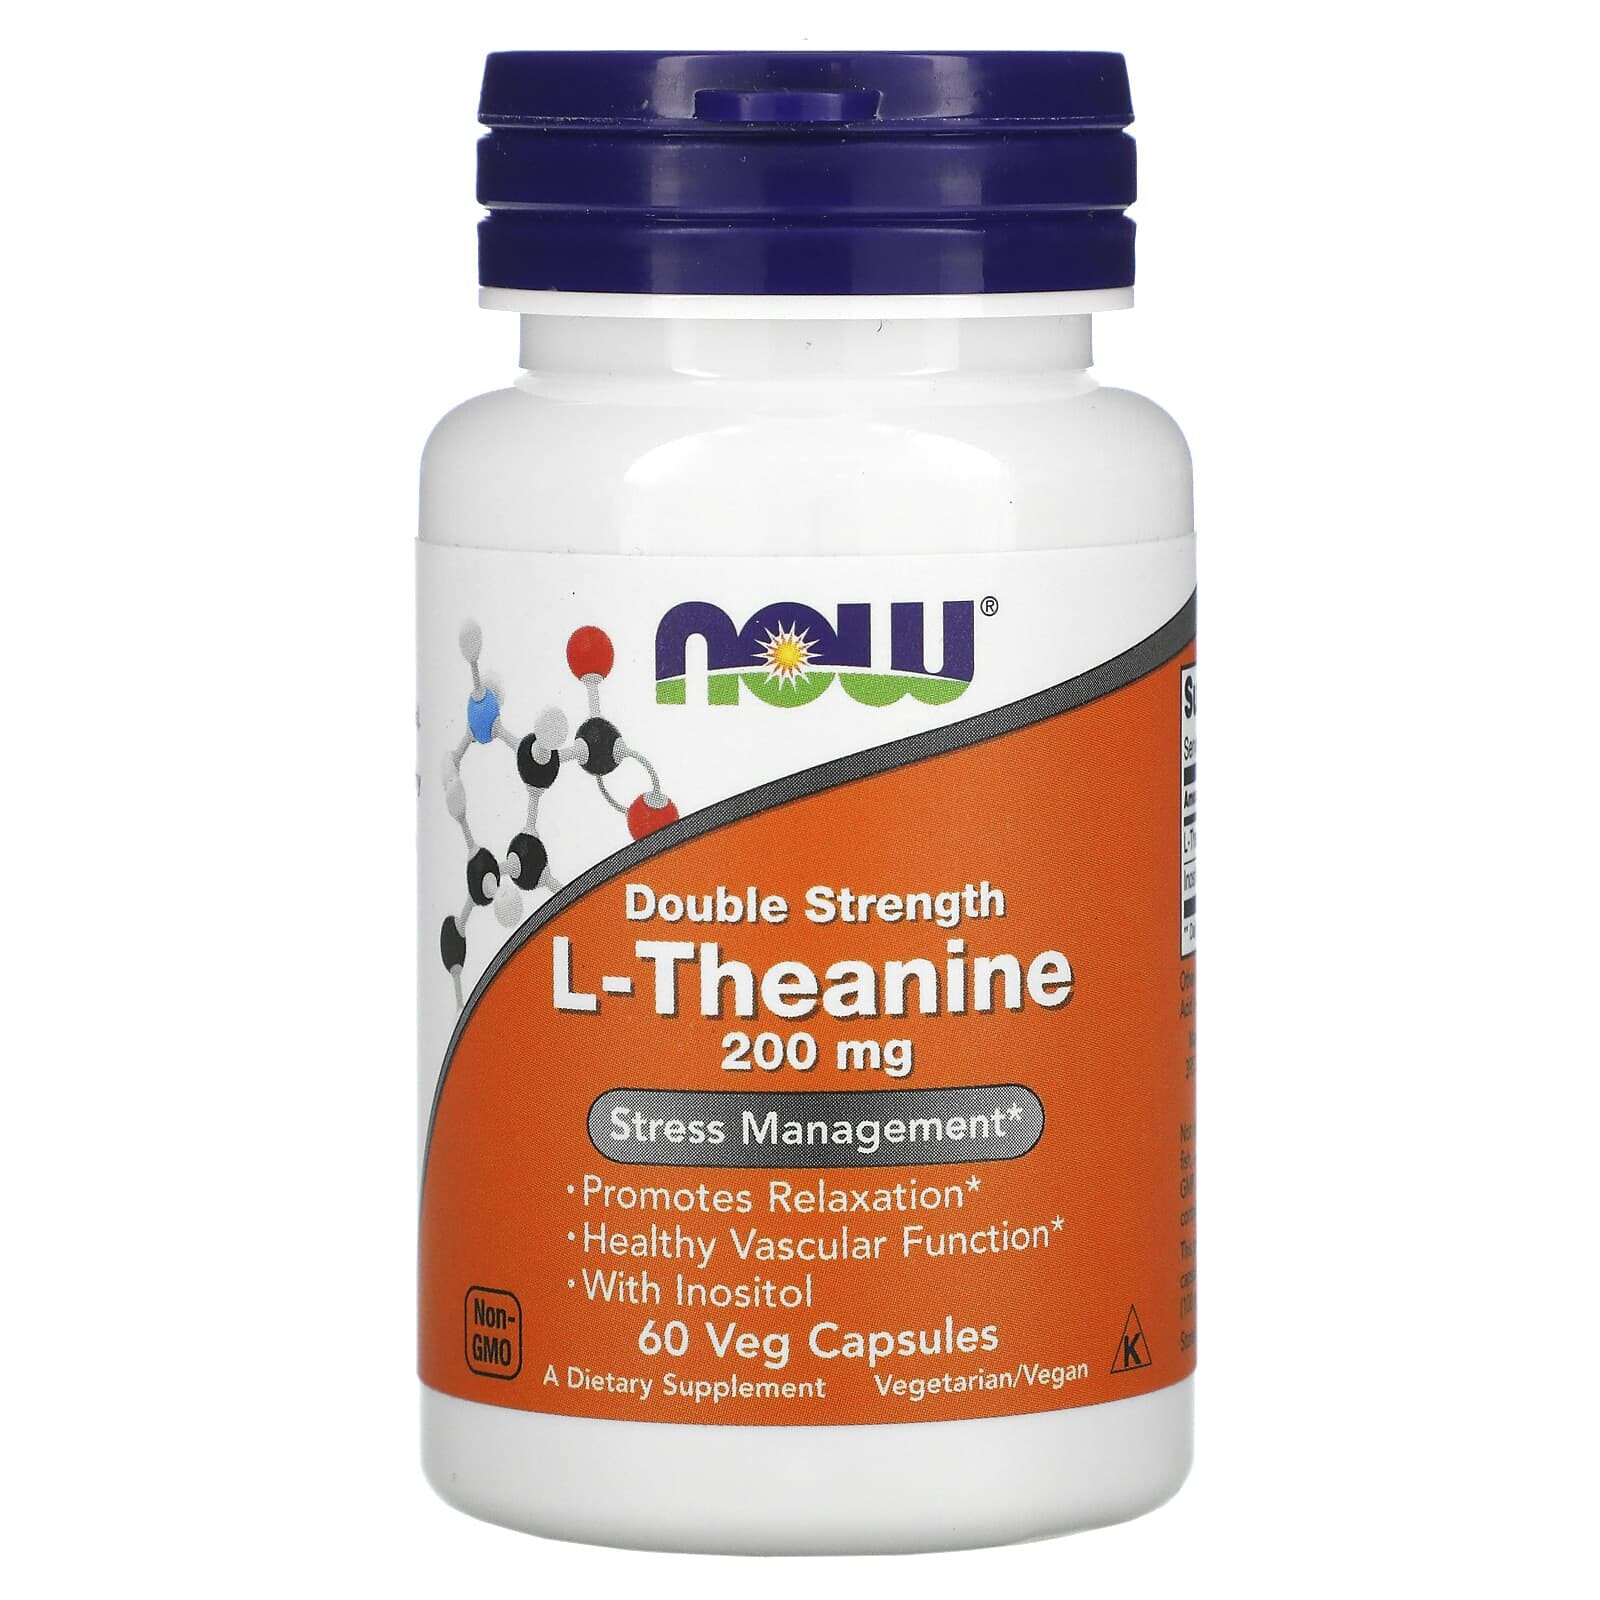 Double Strength L-Theanine, 200 mg, 120 Veg Capsules